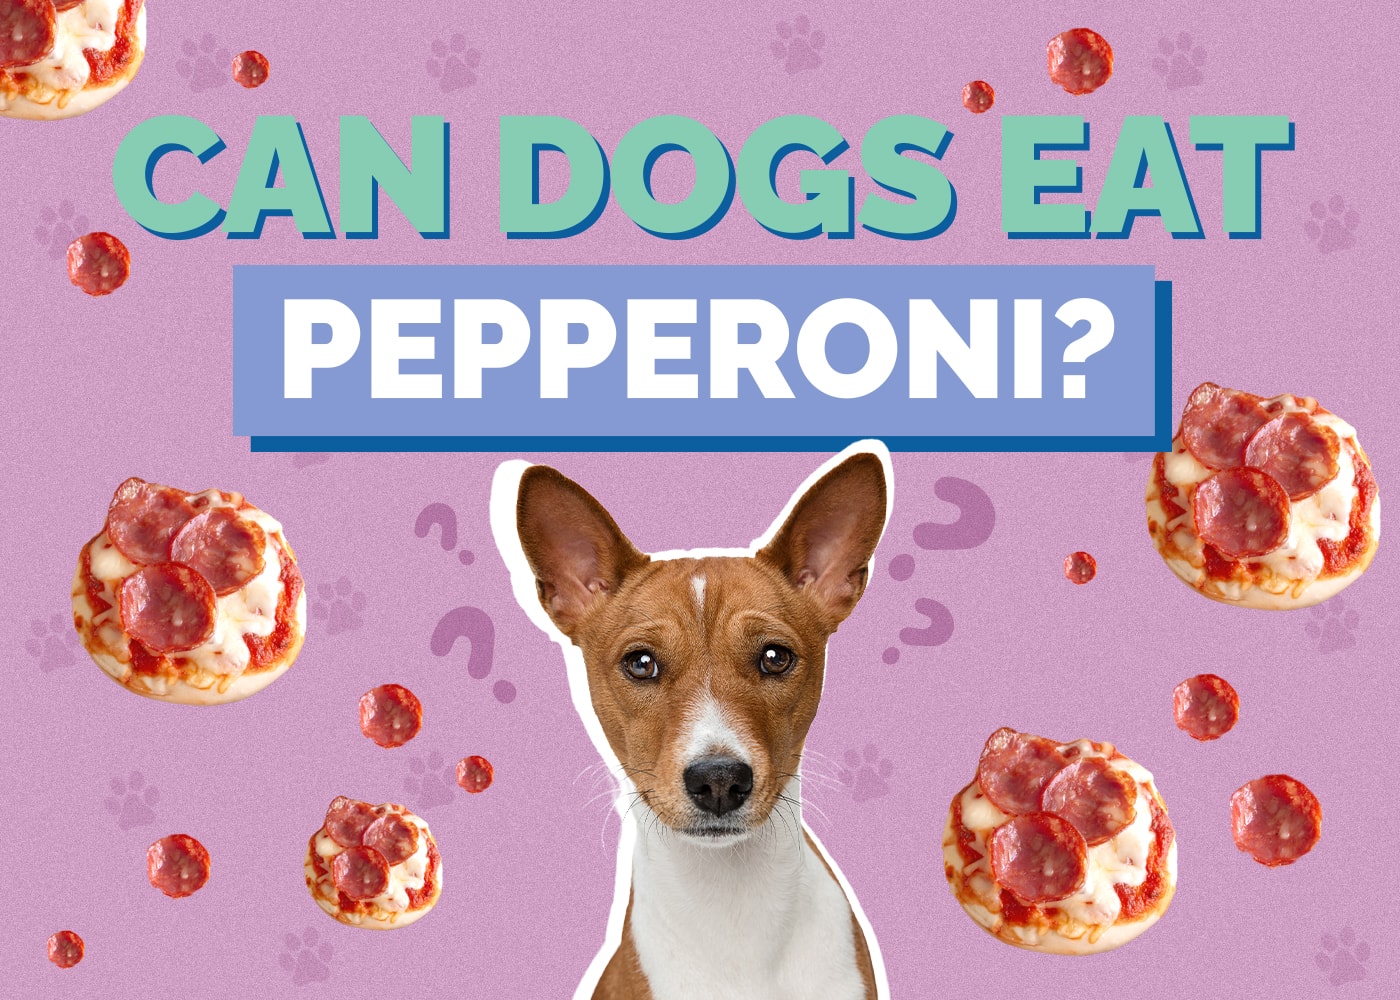 Can Dogs Eat pepperoni